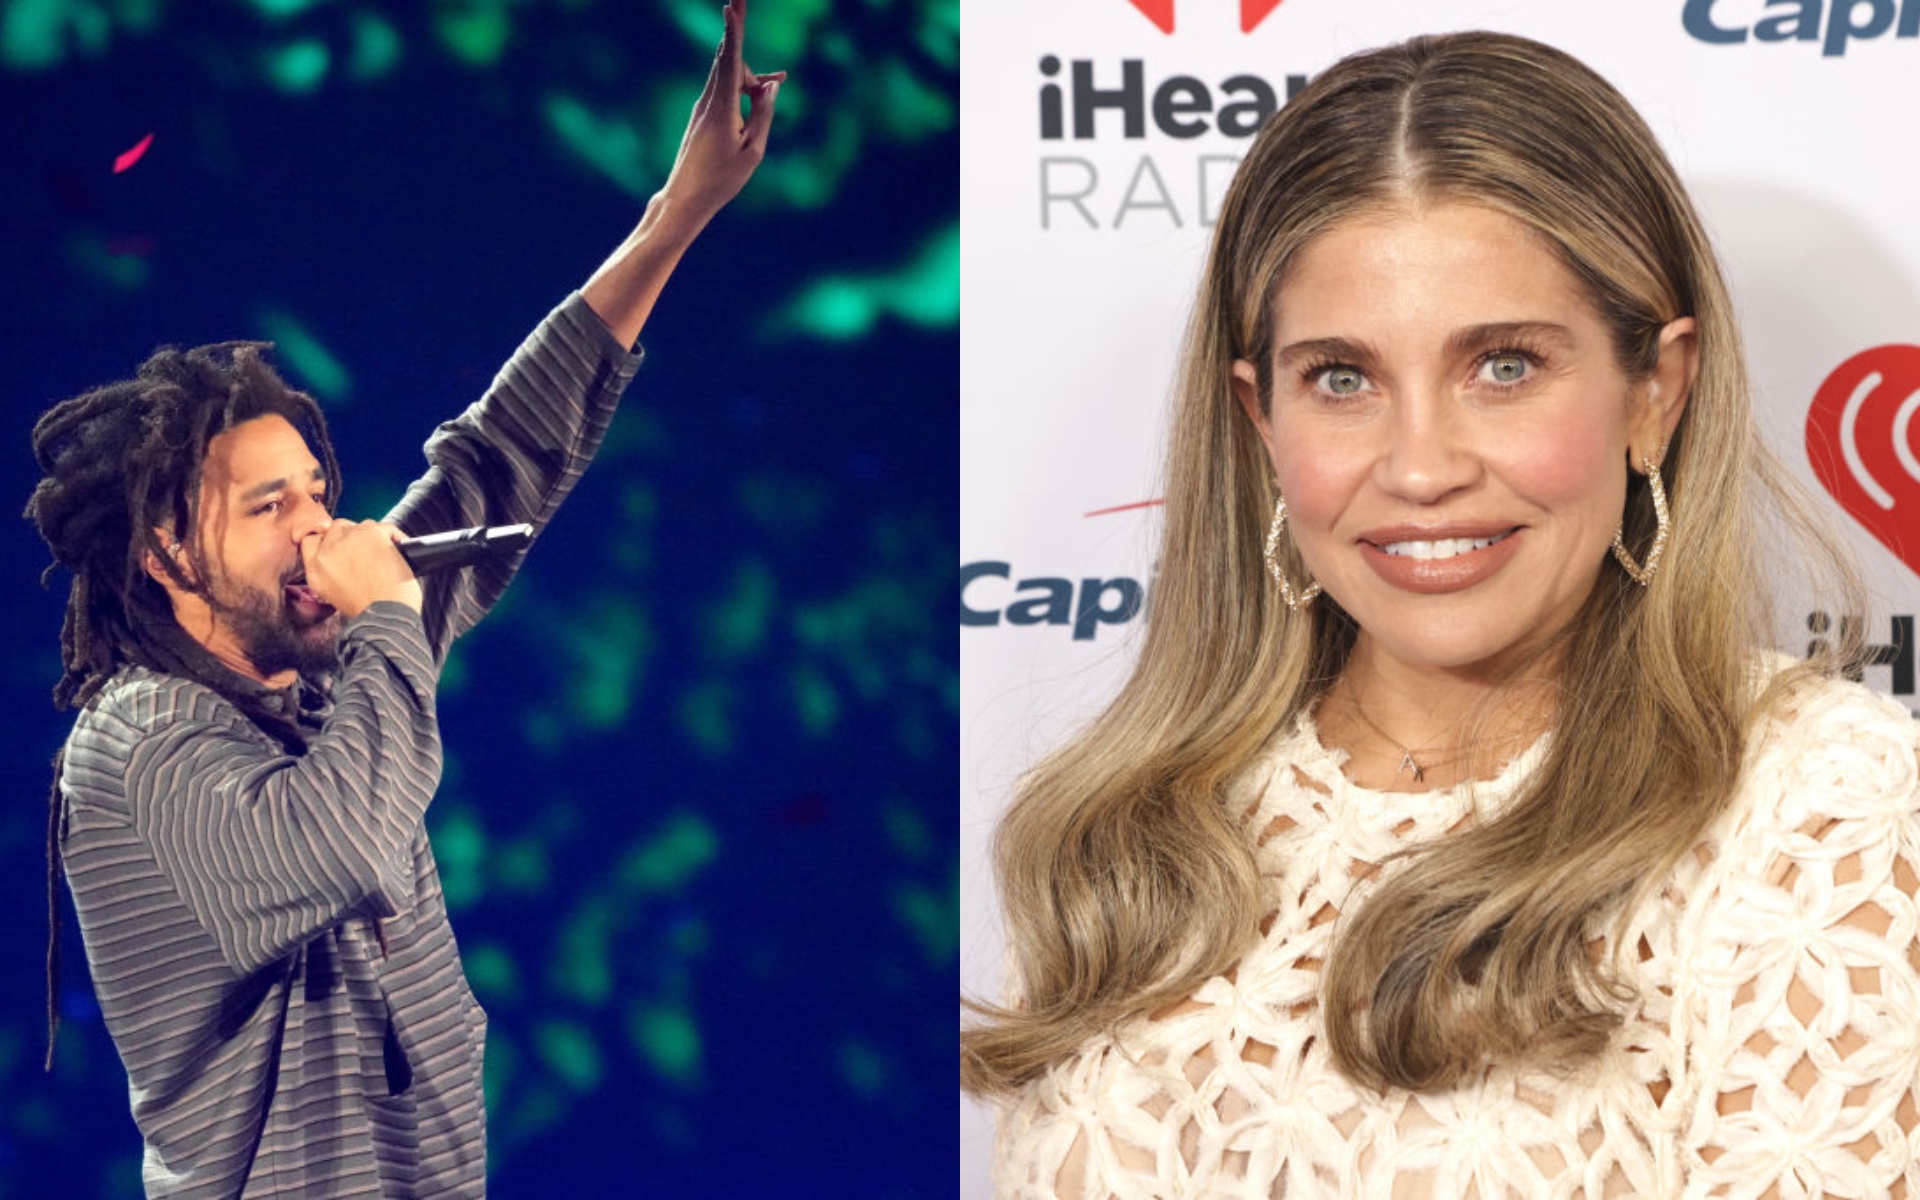 J. Cole And Danielle “Topanga” Fishel Share A Wholesome First Interaction: Watch